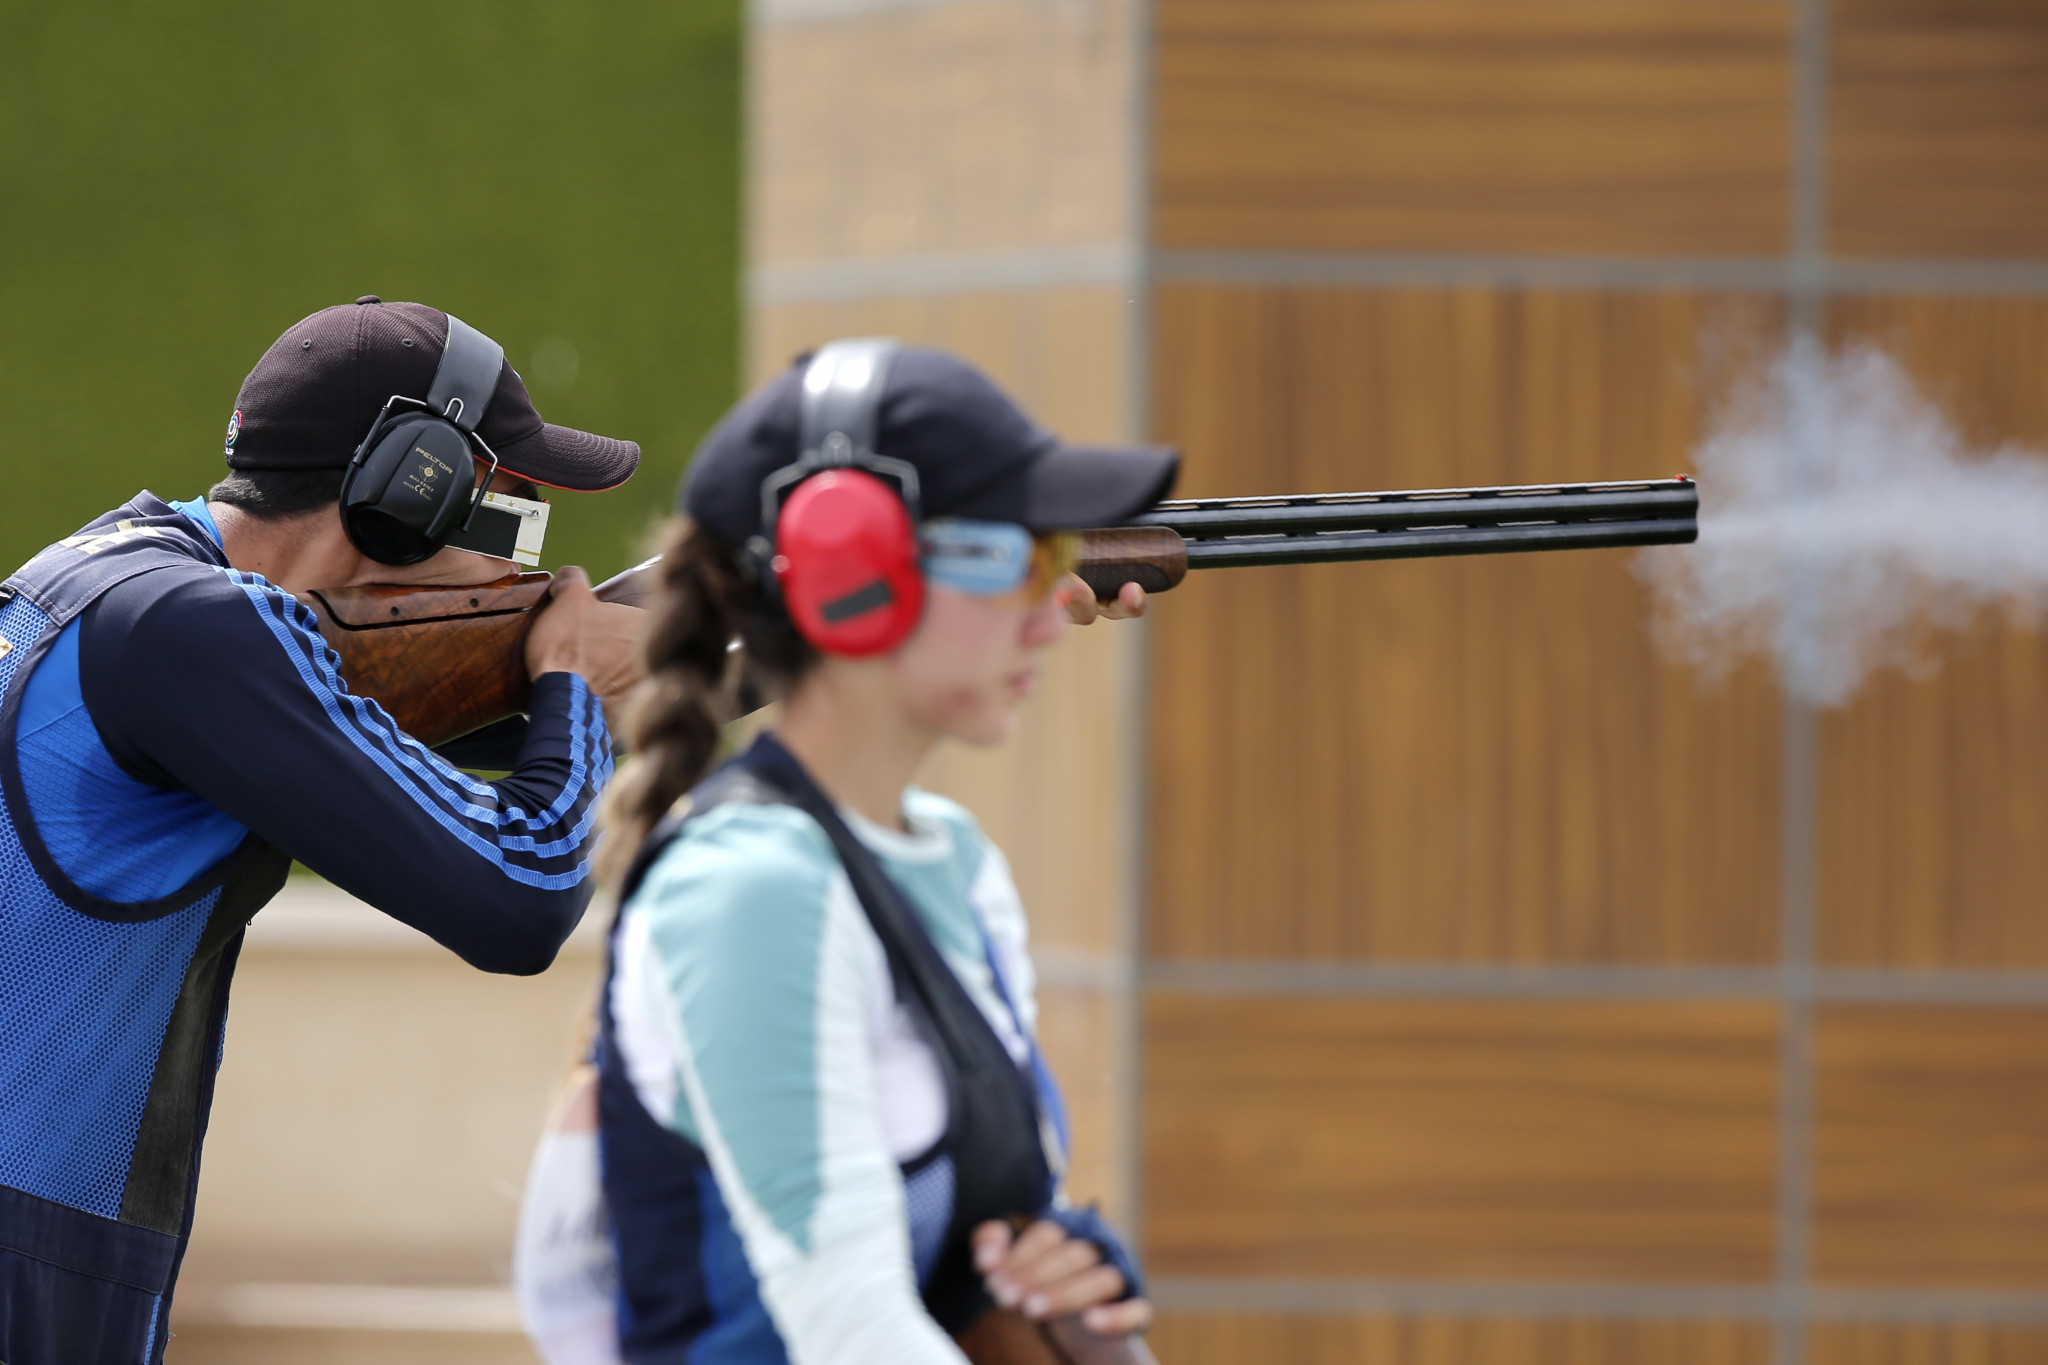 The mixed team trap events will be contested tomorrow on the final day of competition ©Getty Images